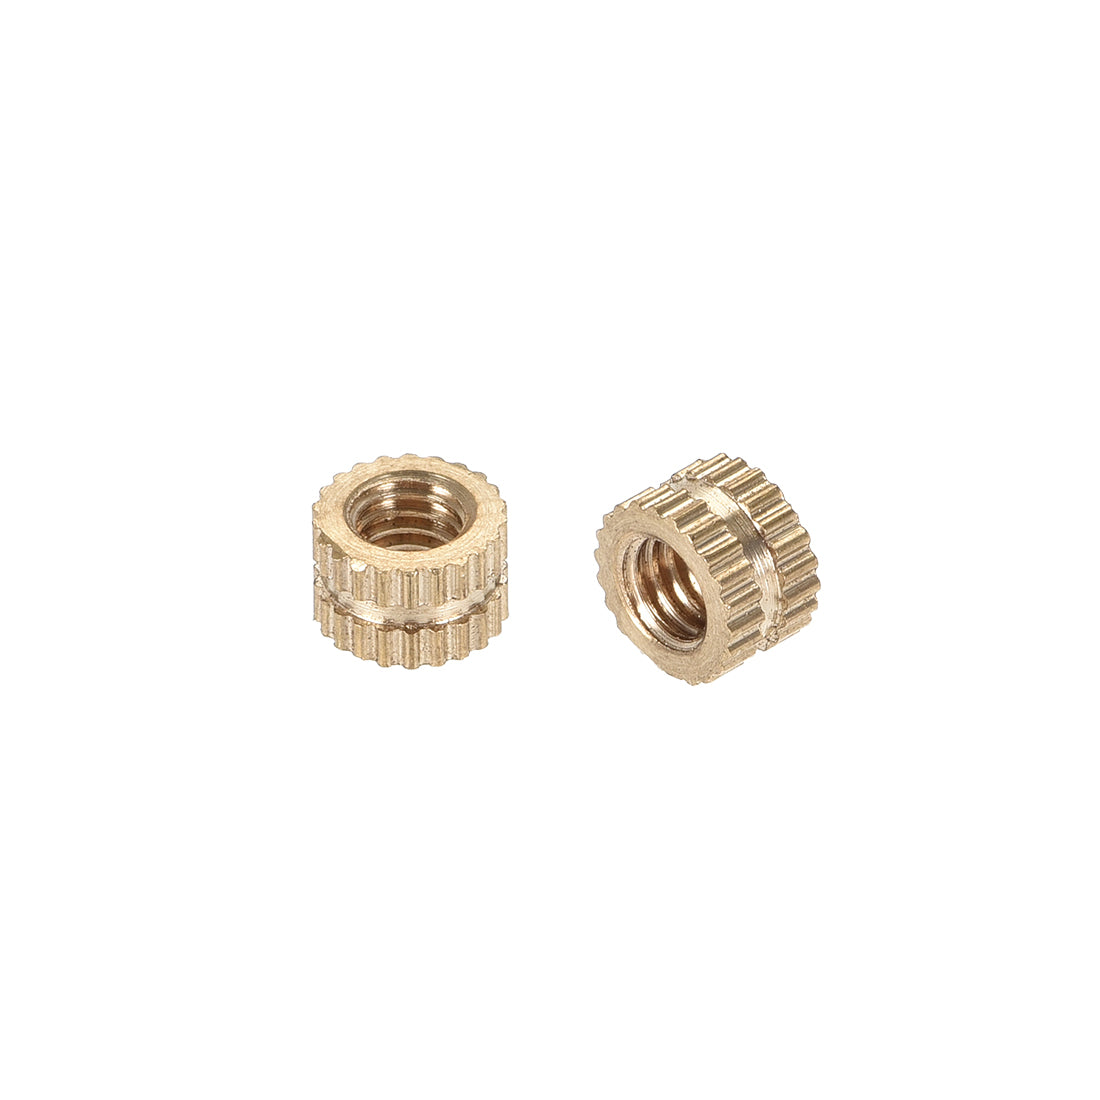 uxcell Uxcell M4 x 0.7mm Female Brass Knurled Threaded Insert Embedment Nut for 3D Printer, 100Pcs